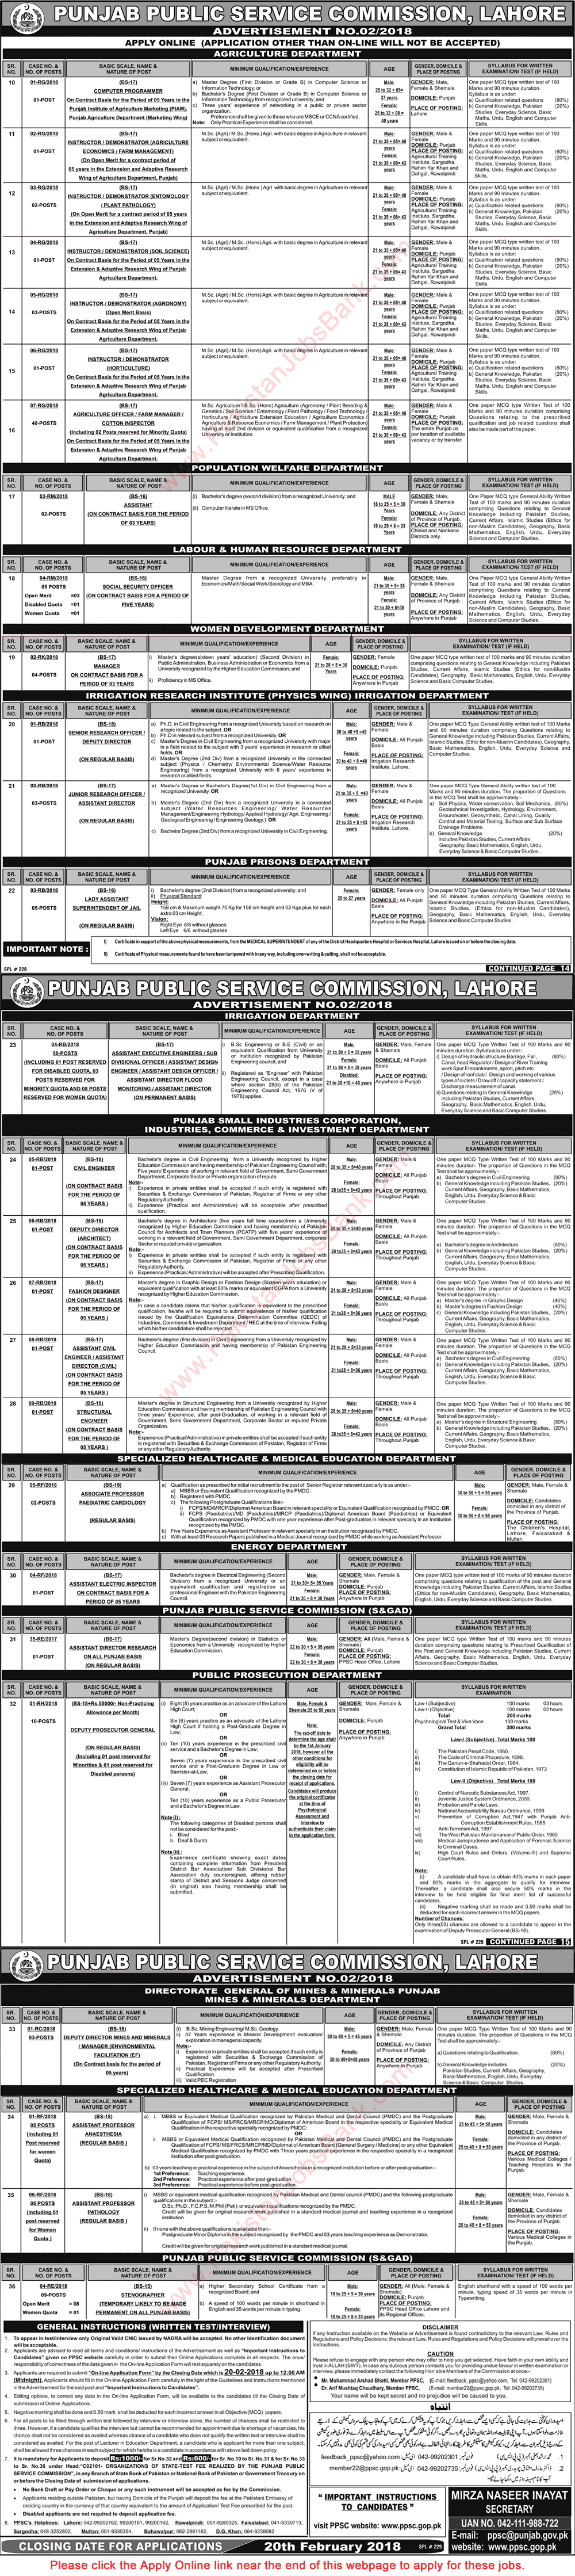 PPSC Jobs February 2018 Apply Online Consolidated Advertisement No 02/2018 2/2018 Latest